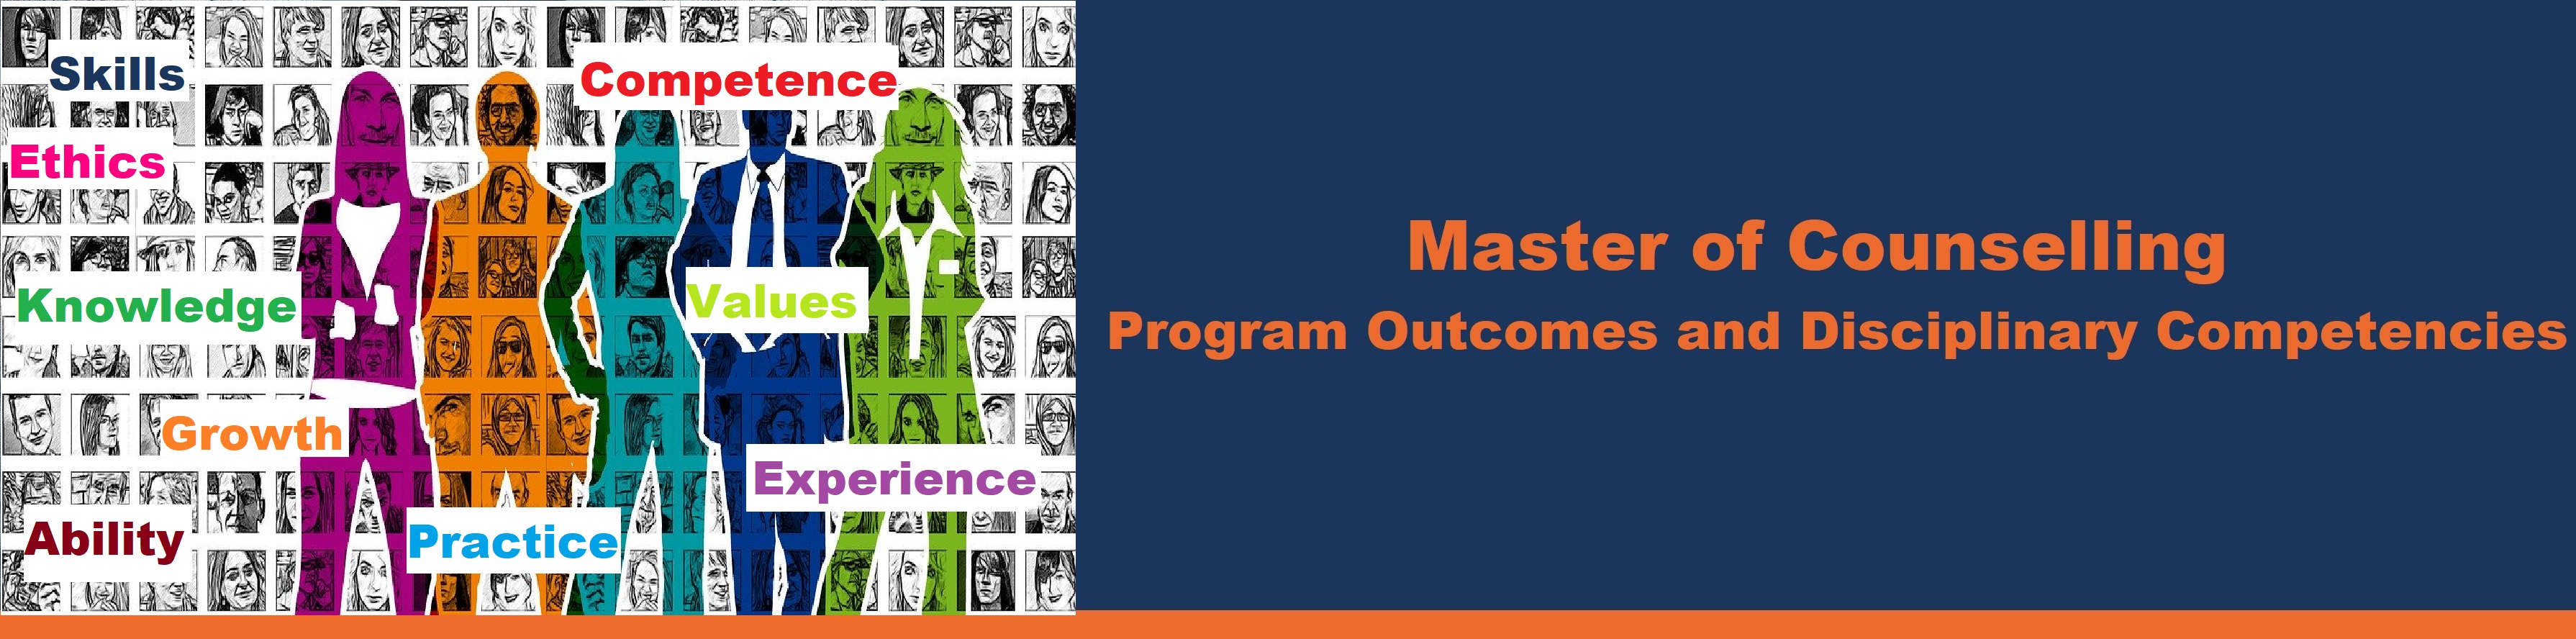 Banner that represents competencies. Picture showing many multicultural faces, 4 silhouettes, and words - Skills, Ethics, Competence, Knowledge, Values, Growth, Practice, Experience, Ability. Title says: MAsters of Counselling Program Outcomes and Disciplinary Competencies.